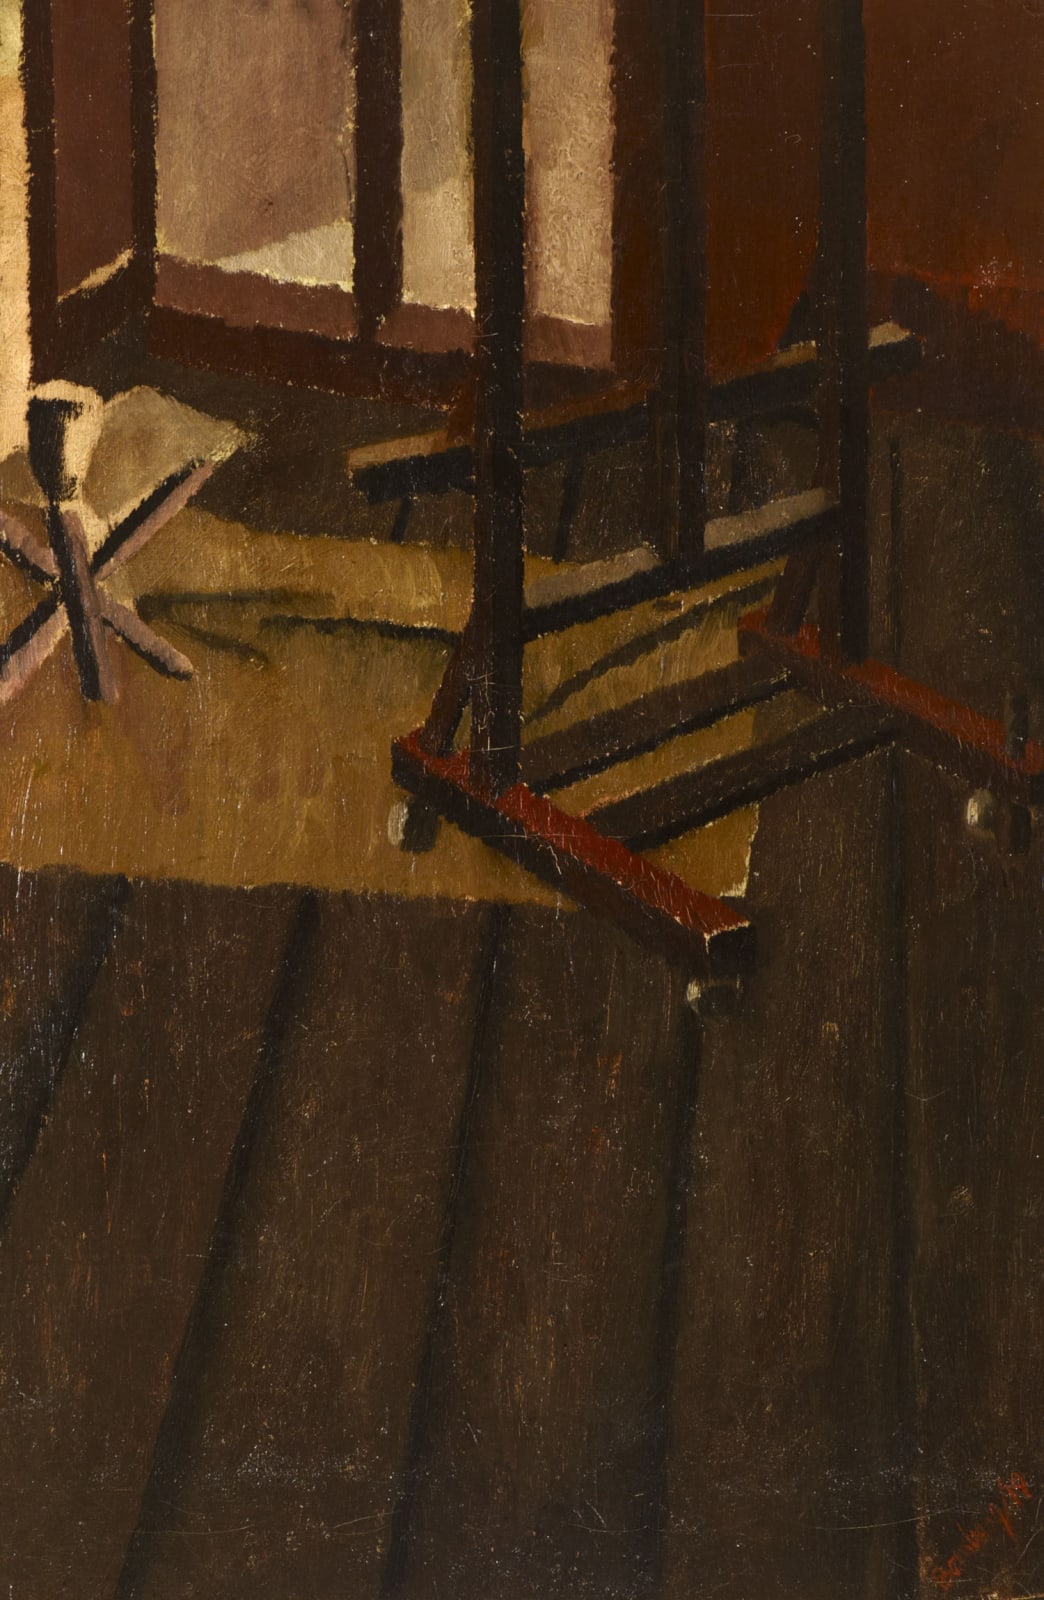 David Bomberg (1890-1957) The Studio 1919 Oil on board 74.3 x 49 cm Ben Uri Collection © David Bomberg estate To see and discover more about this artist click here